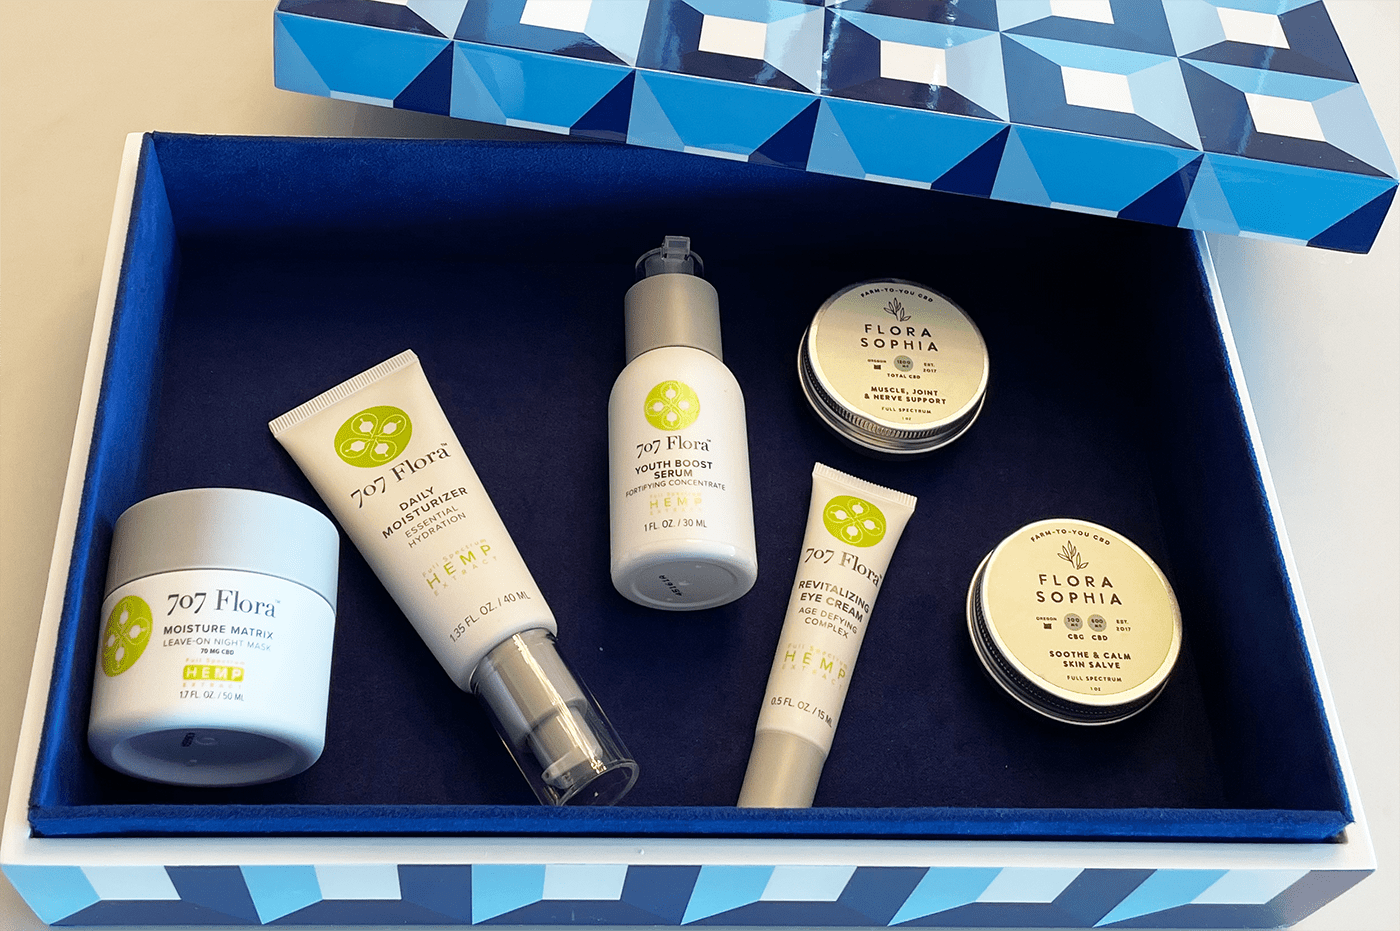 We depend on our fave CBD topicals for everything from pain relief to radiant skin.